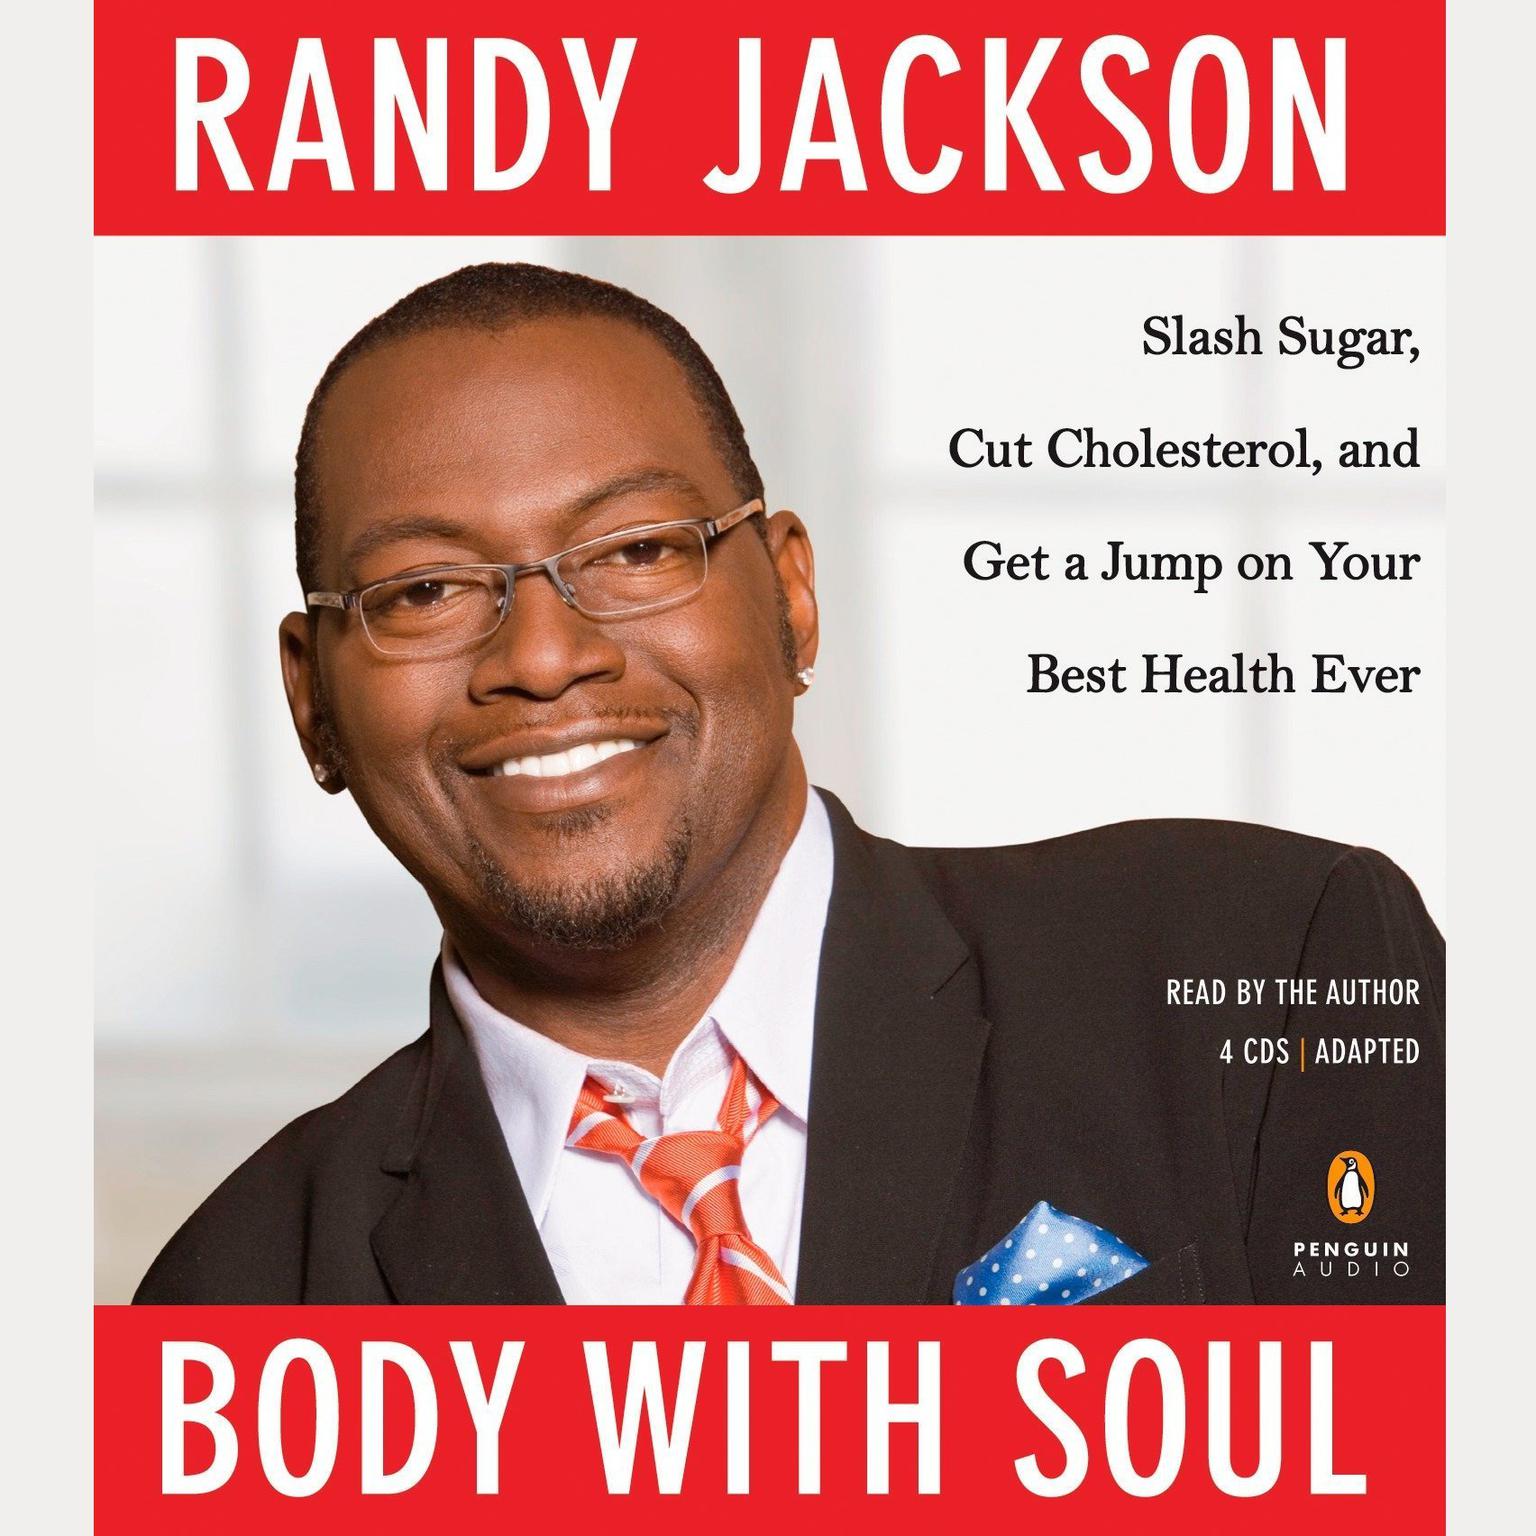 Body with Soul (Abridged): Slash Sugar, Cut Cholesterol, and Get a Jump on Your Best Health Ever Audiobook, by Randy Jackson